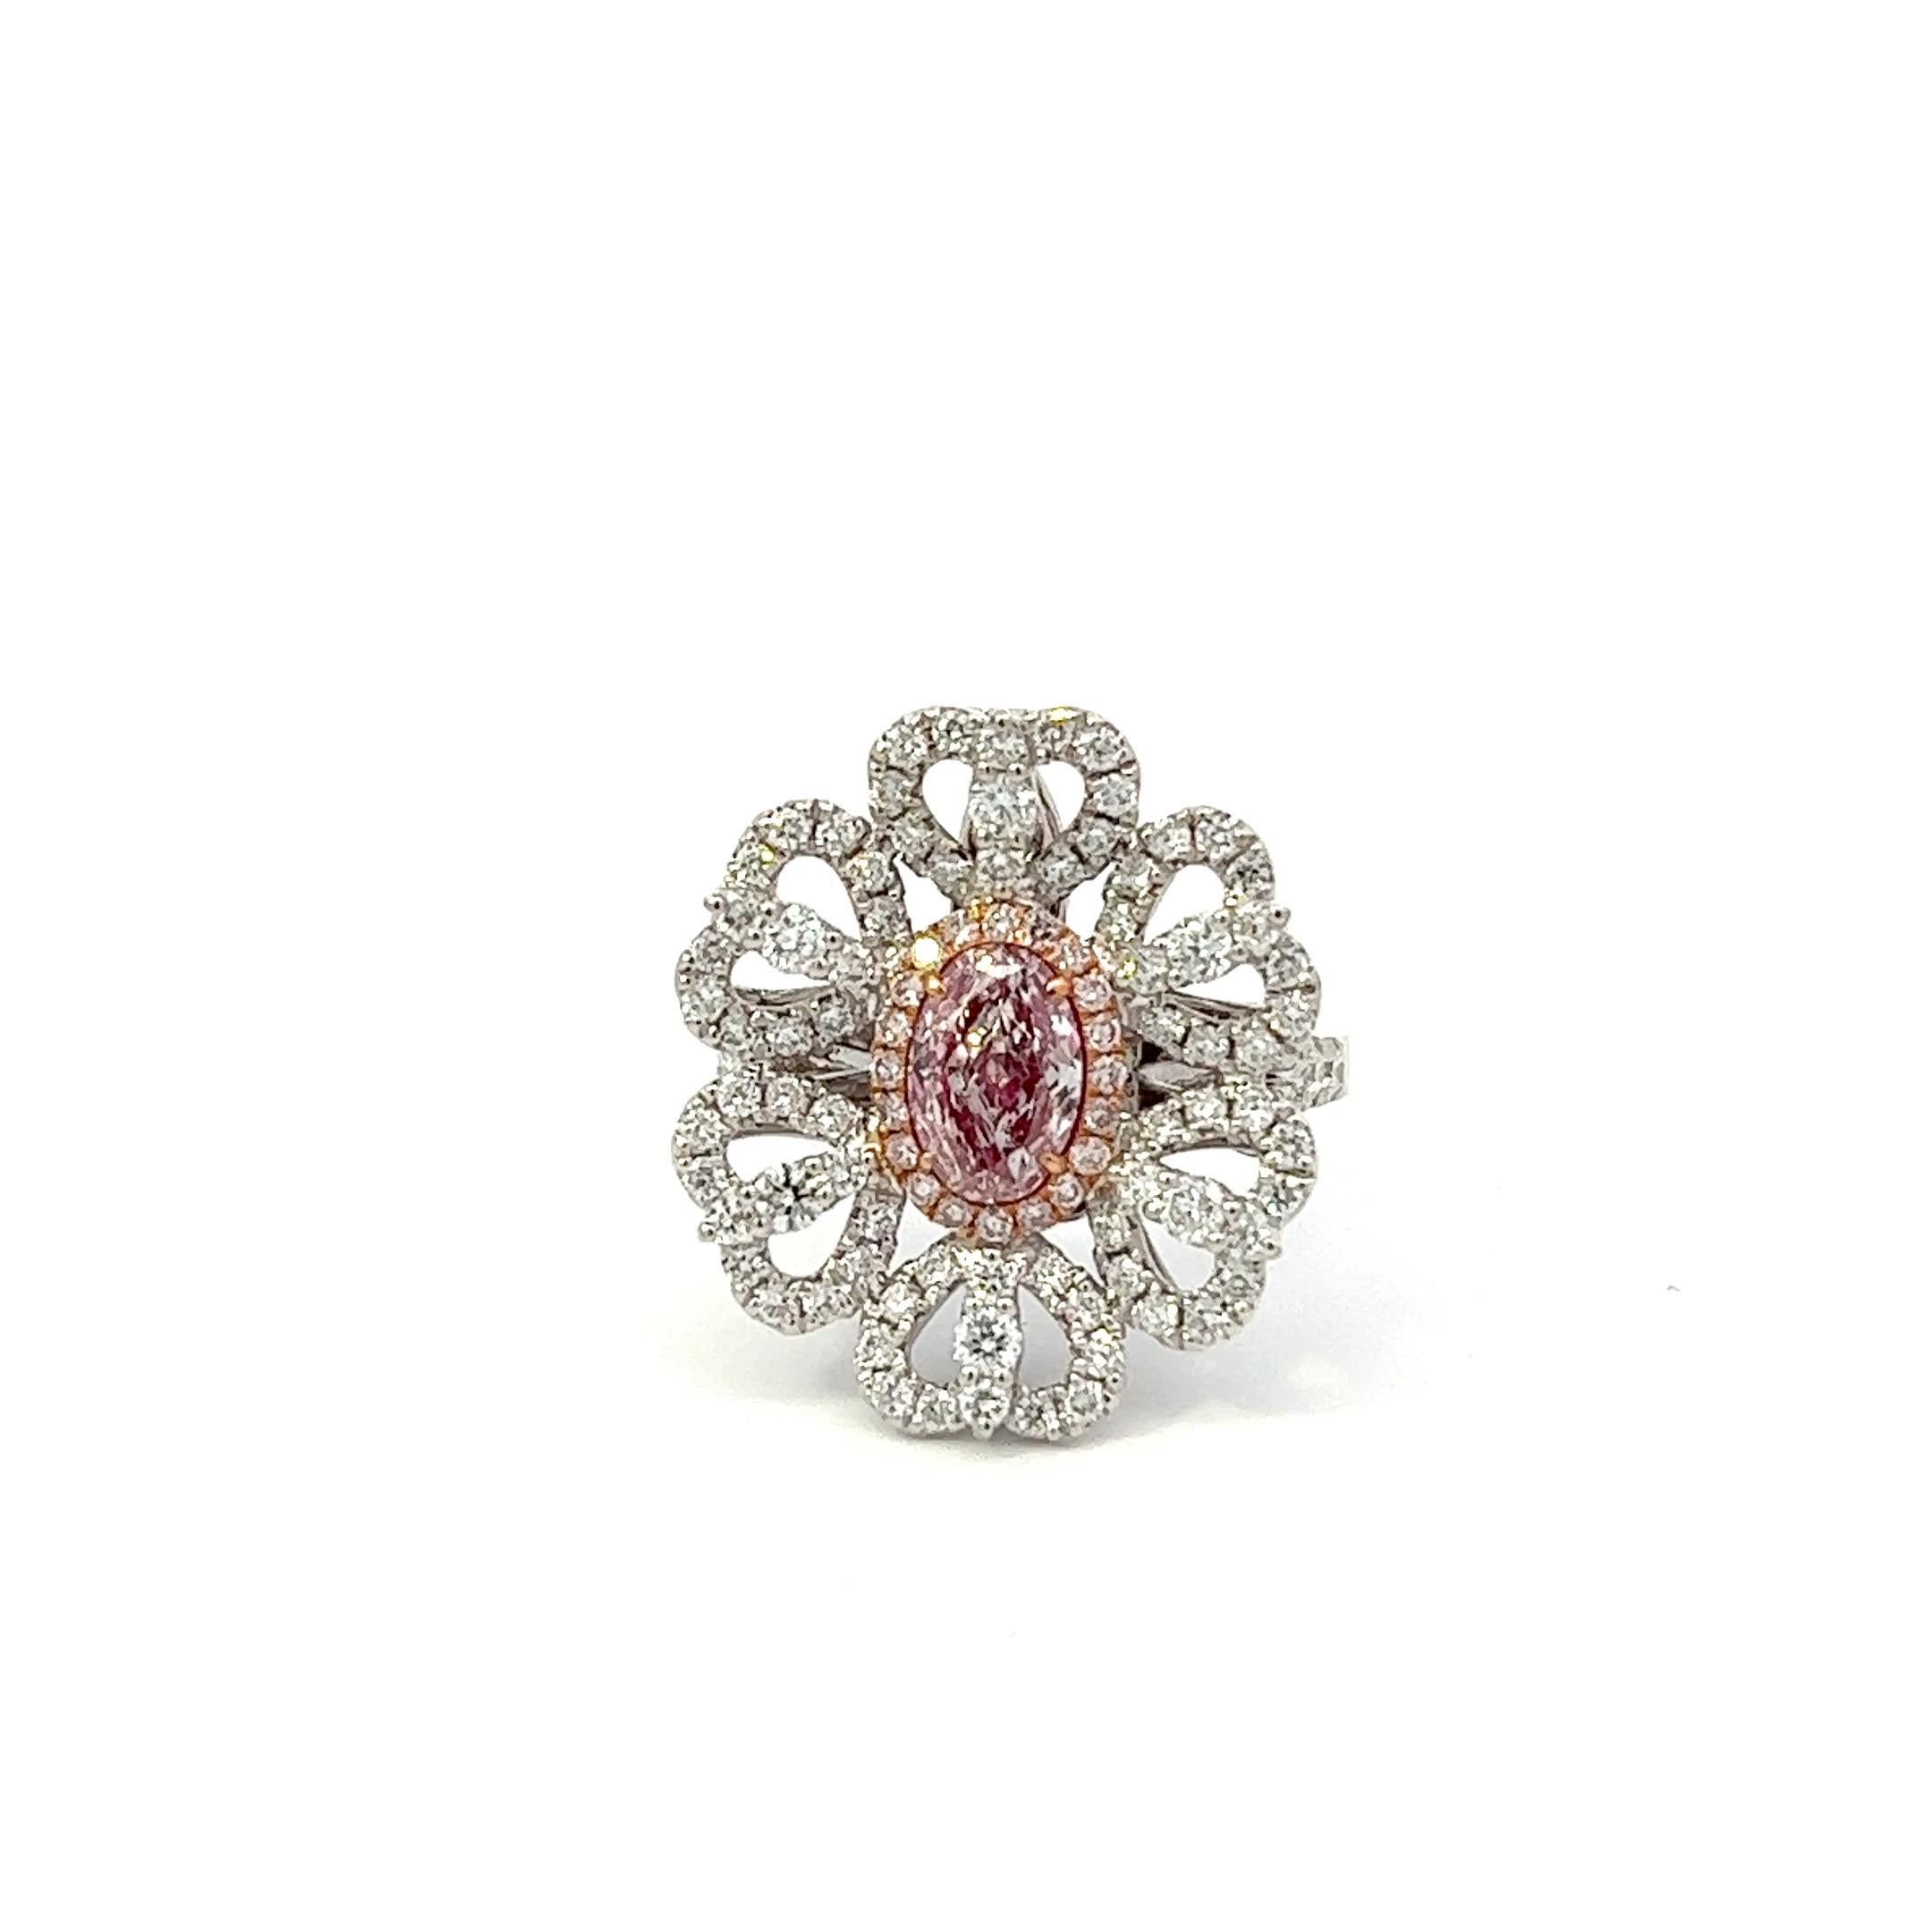 Center: 0.84ct Fancy Light Pinkish Brown SI1 GIA# 5373091338
Setting: 18k White Gold 1.08ctw Pink and White Diamonds

An extremely rare and stunning natural pink diamond center. Pink Diamonds account for less than 0.01% of all diamonds mined in the